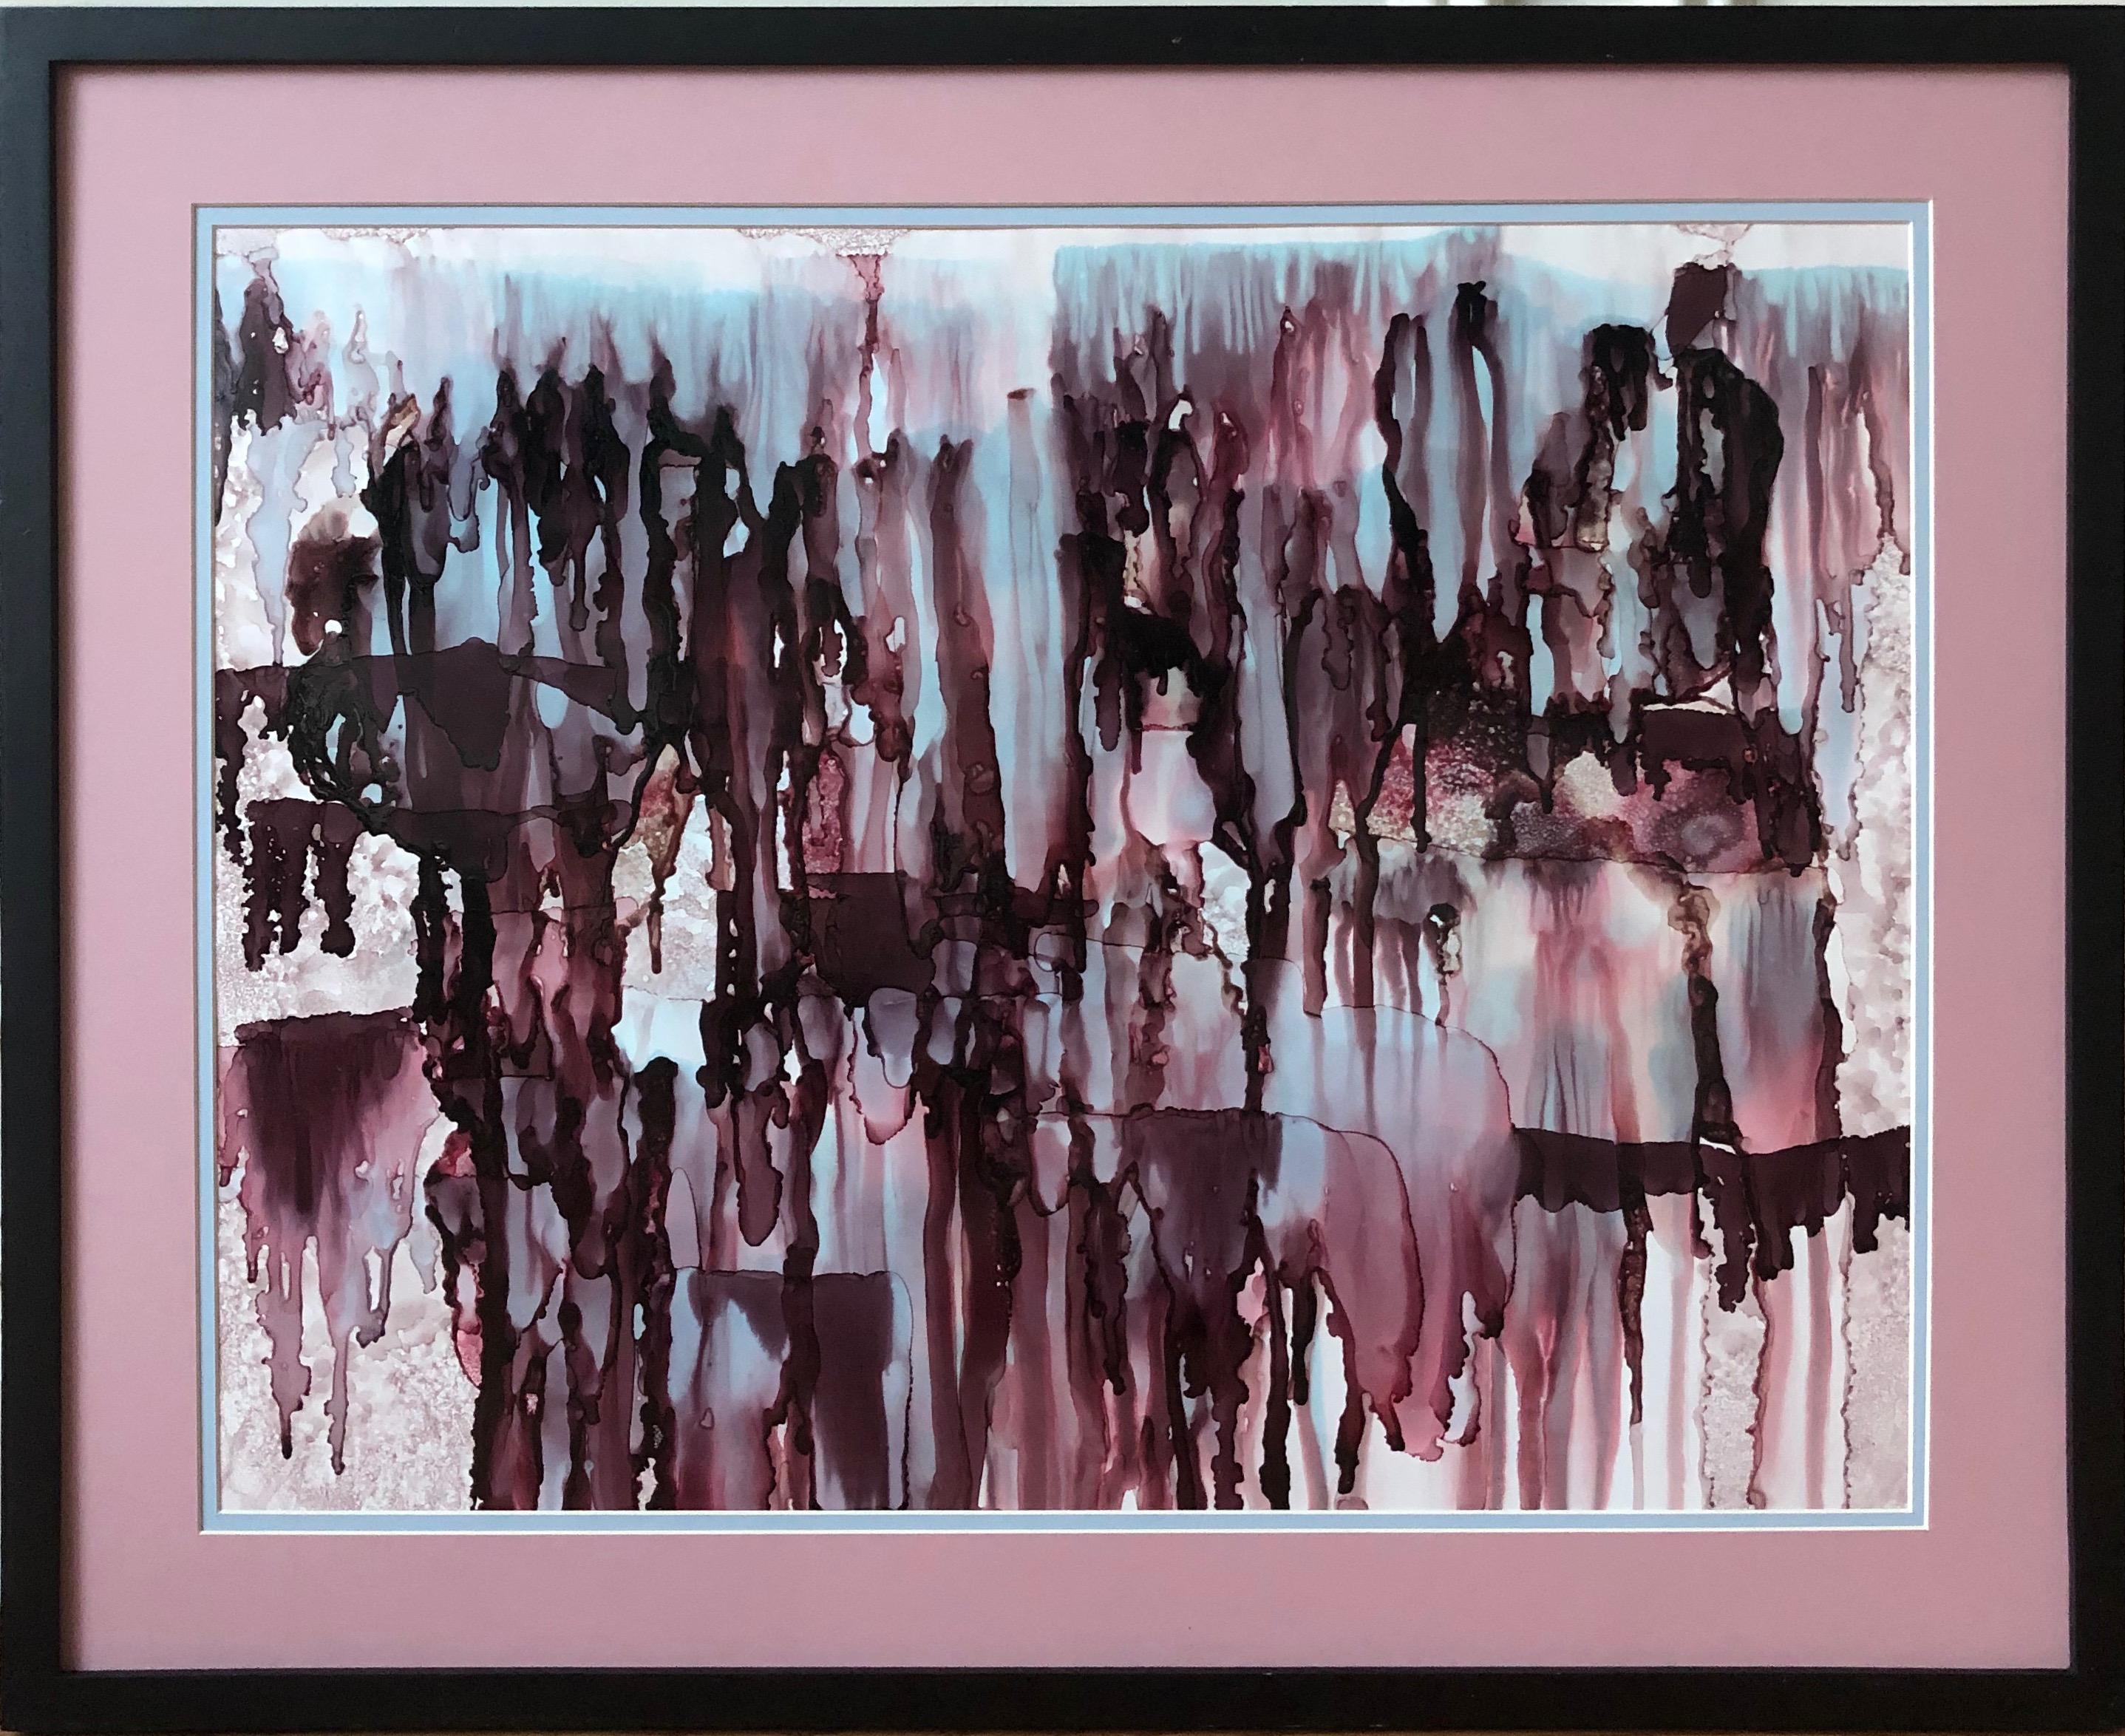 Colorfall III-abstraction art, made in garnet red, light blue, aubergine color